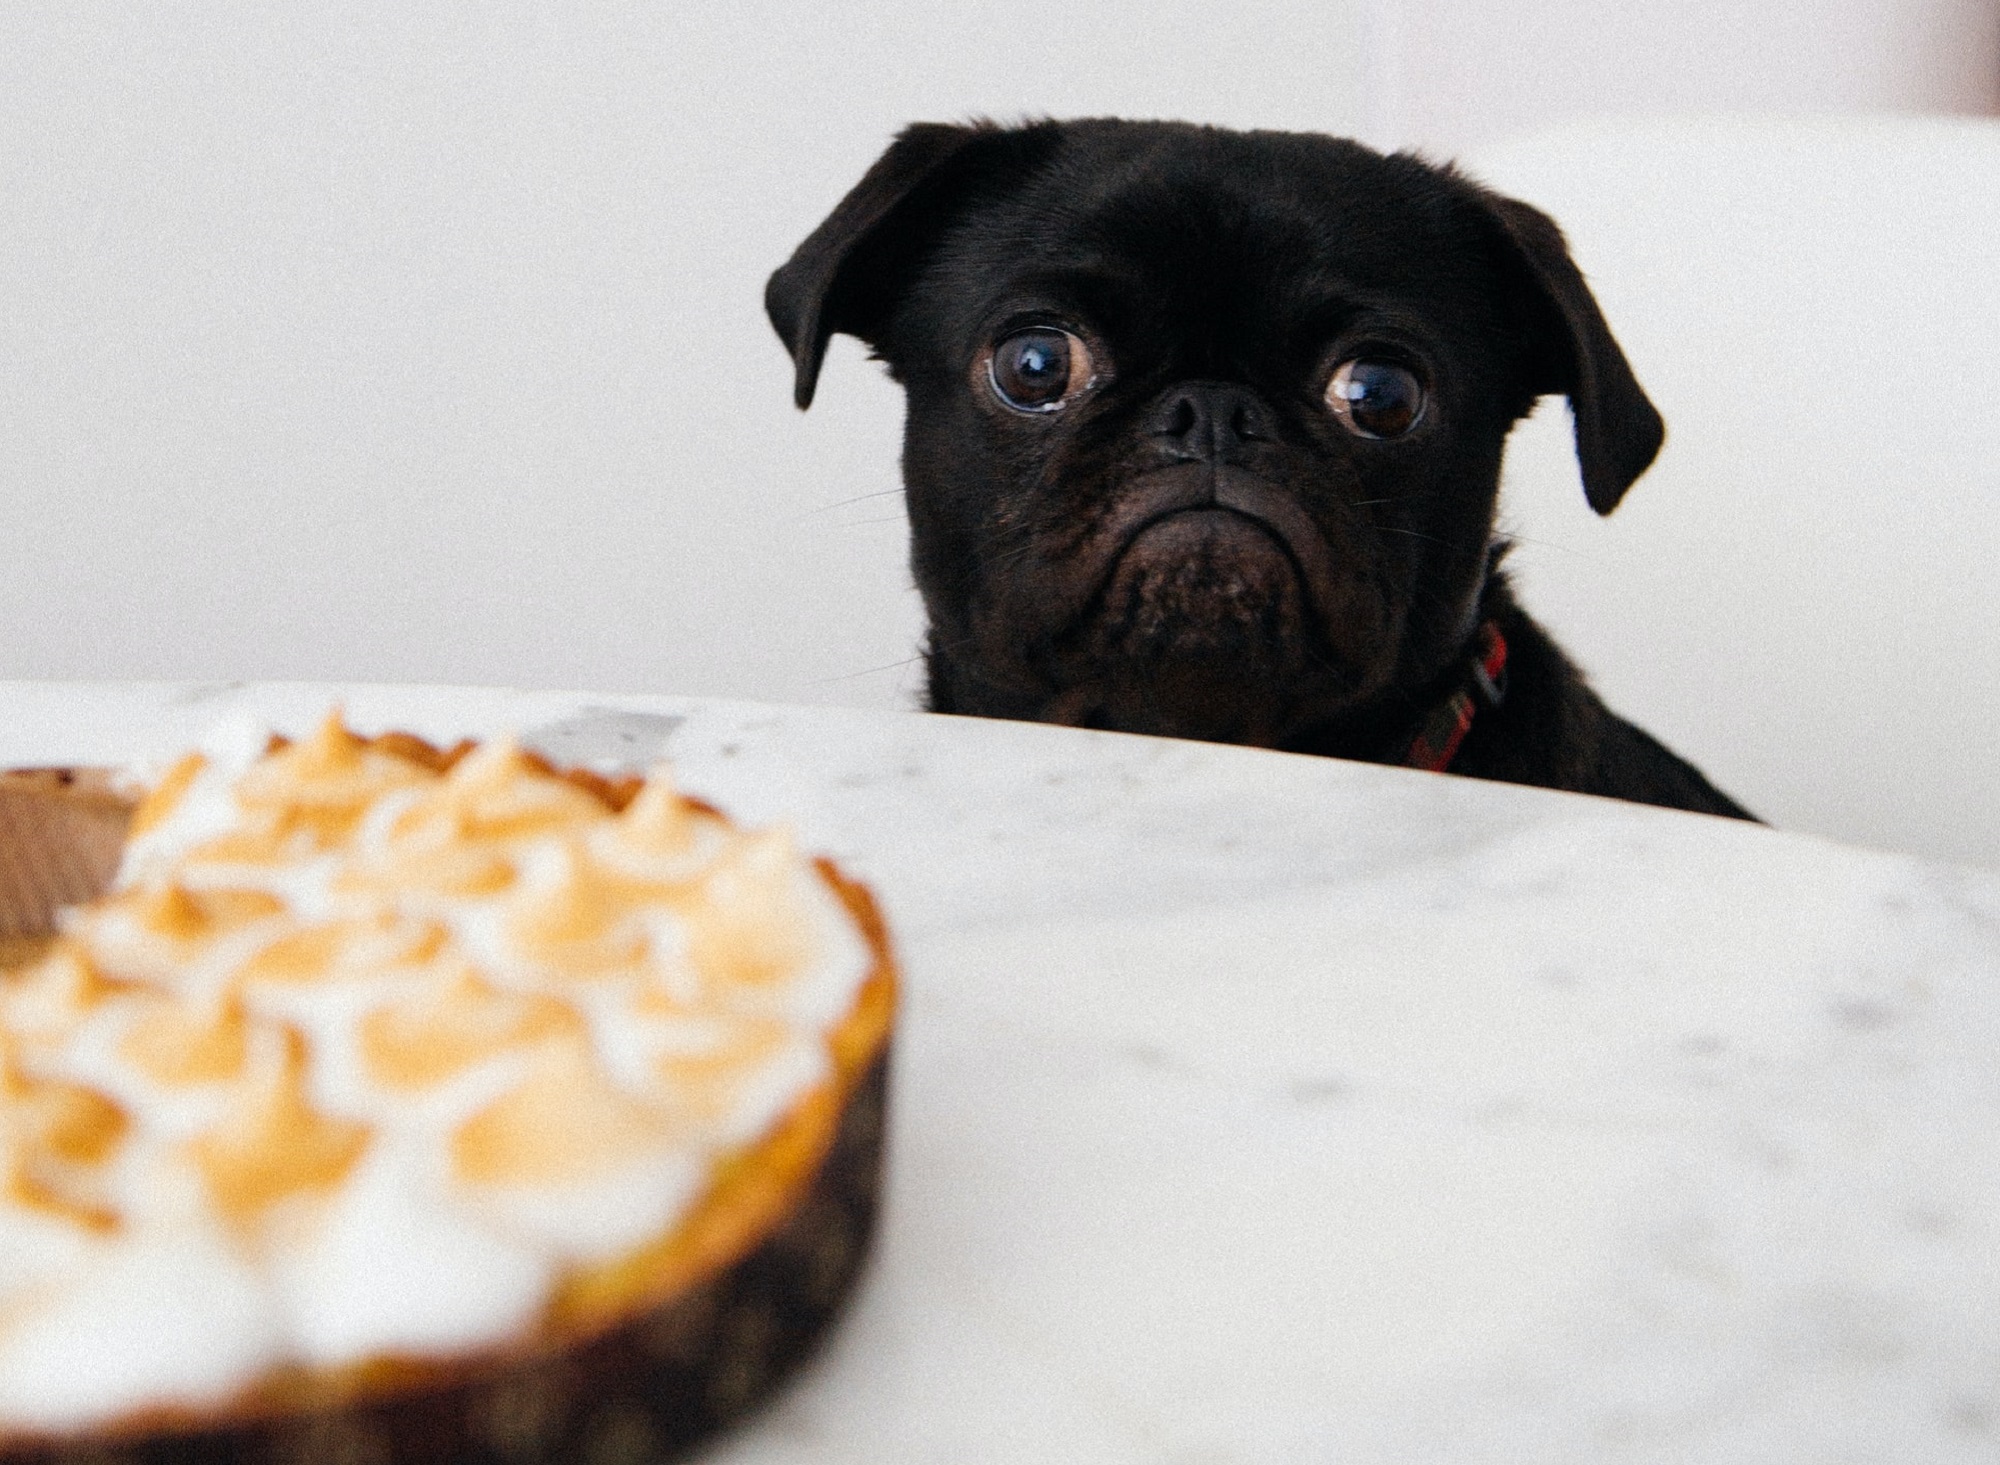 5 Thanksgiving foods that can be dangerous for dogs and cats